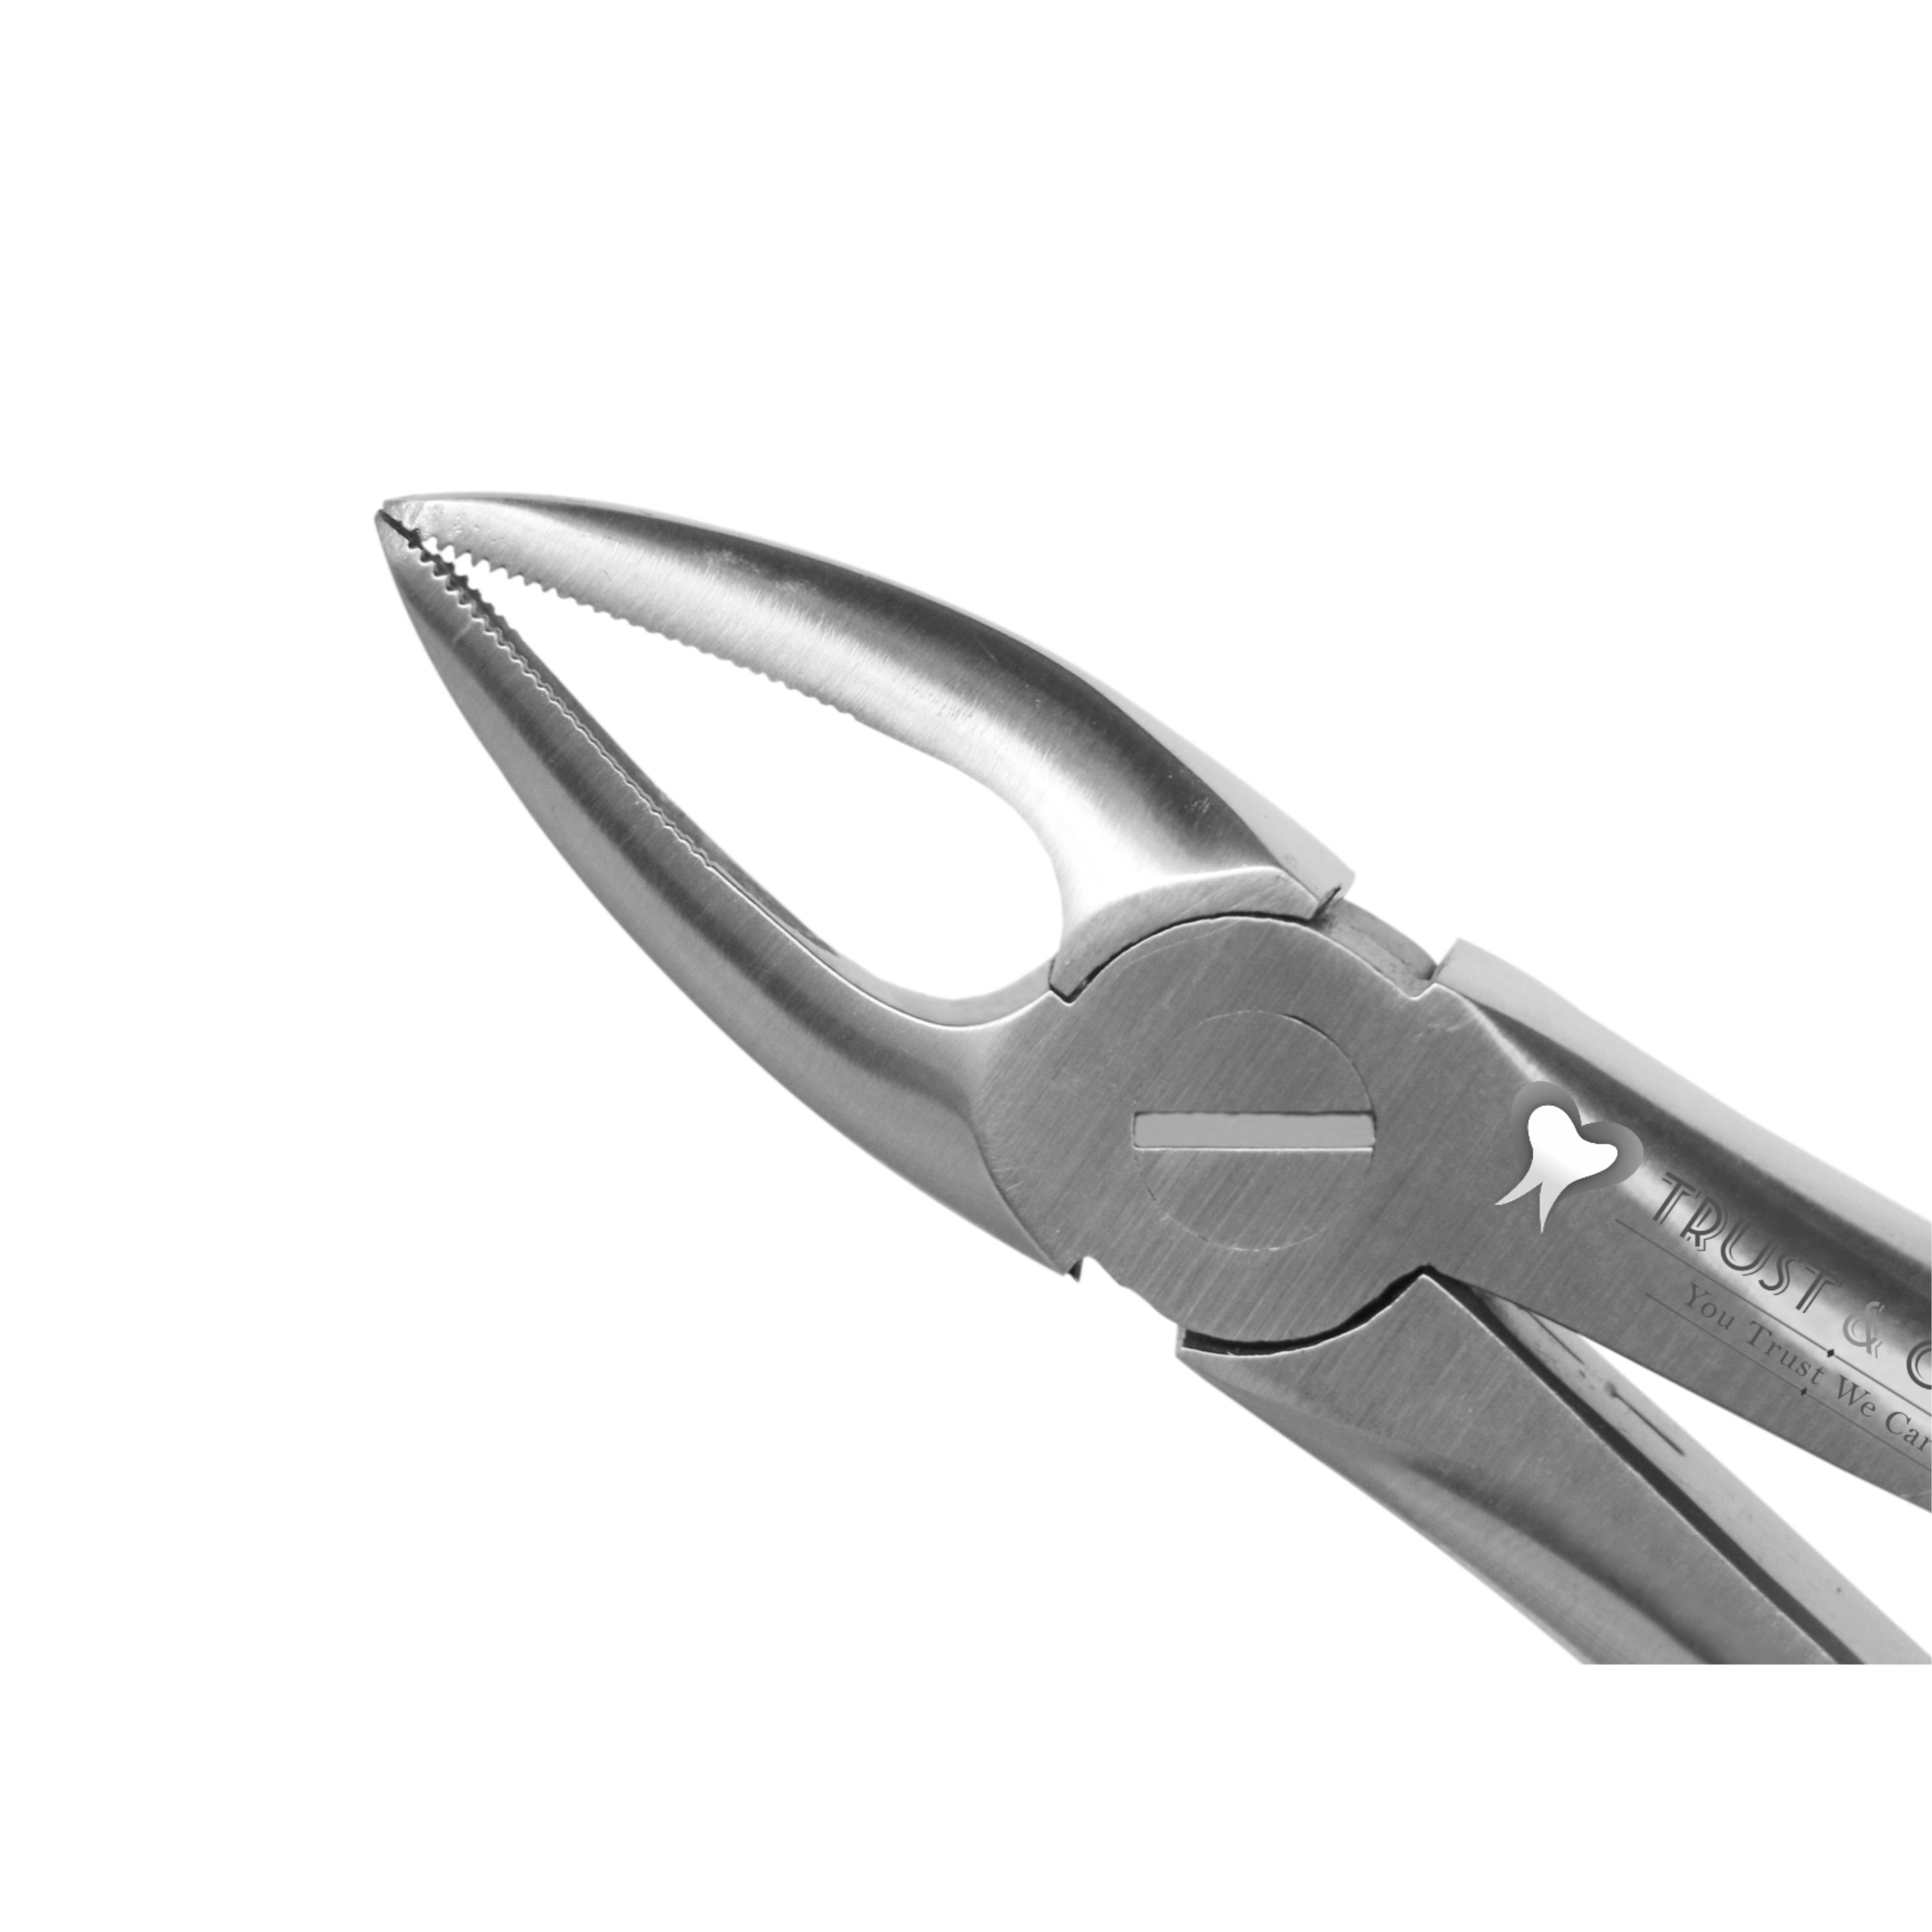 Trust & Care Tooth Extraction Forcep Upper Roots Fig No. 29 Premium